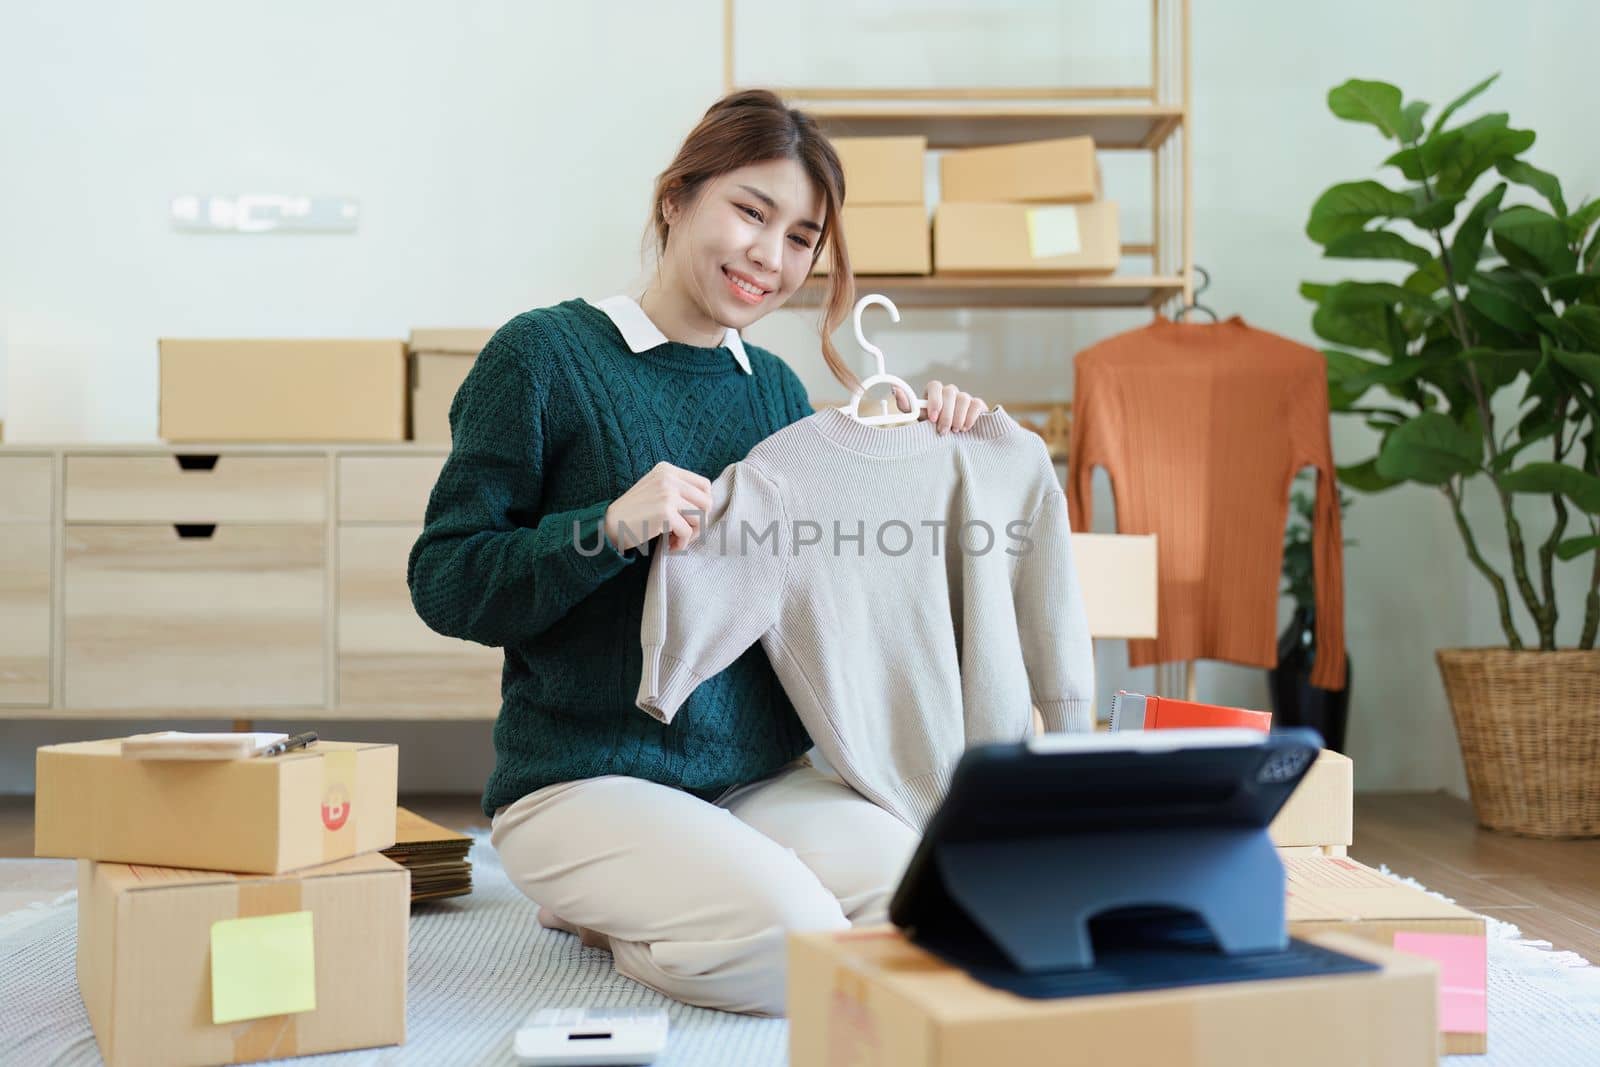 Starting small business entrepreneur of independent young Asian woman online seller using a tablet computer showing products to a customer before making a purchase decision. SME delivery concept by Manastrong